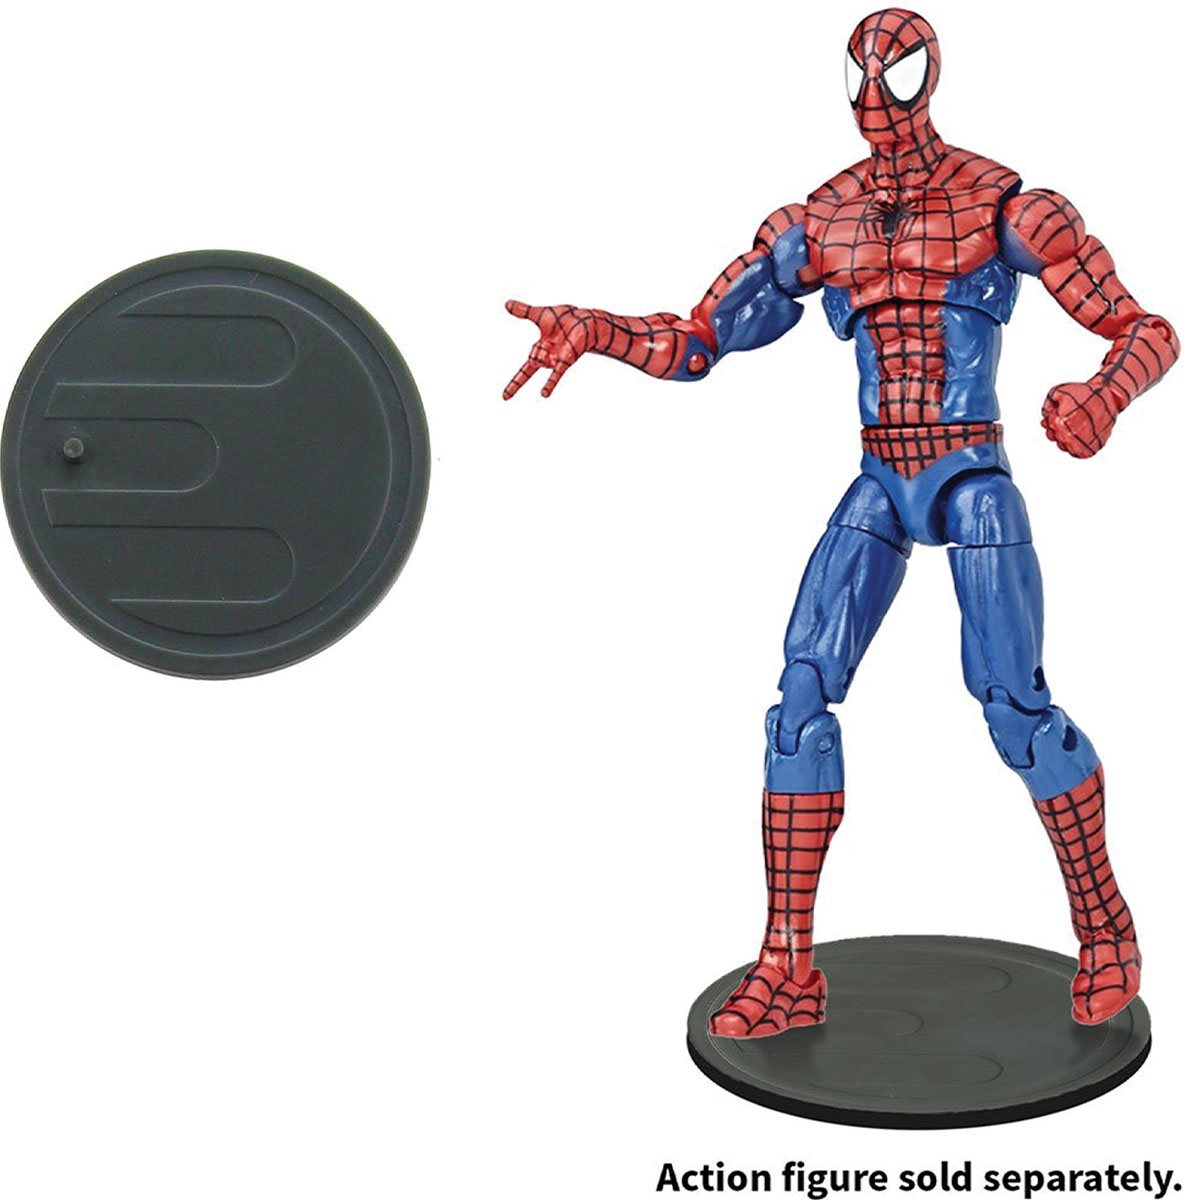 NECA Action Figure Display Stand: Dynamic Action Figure Stand